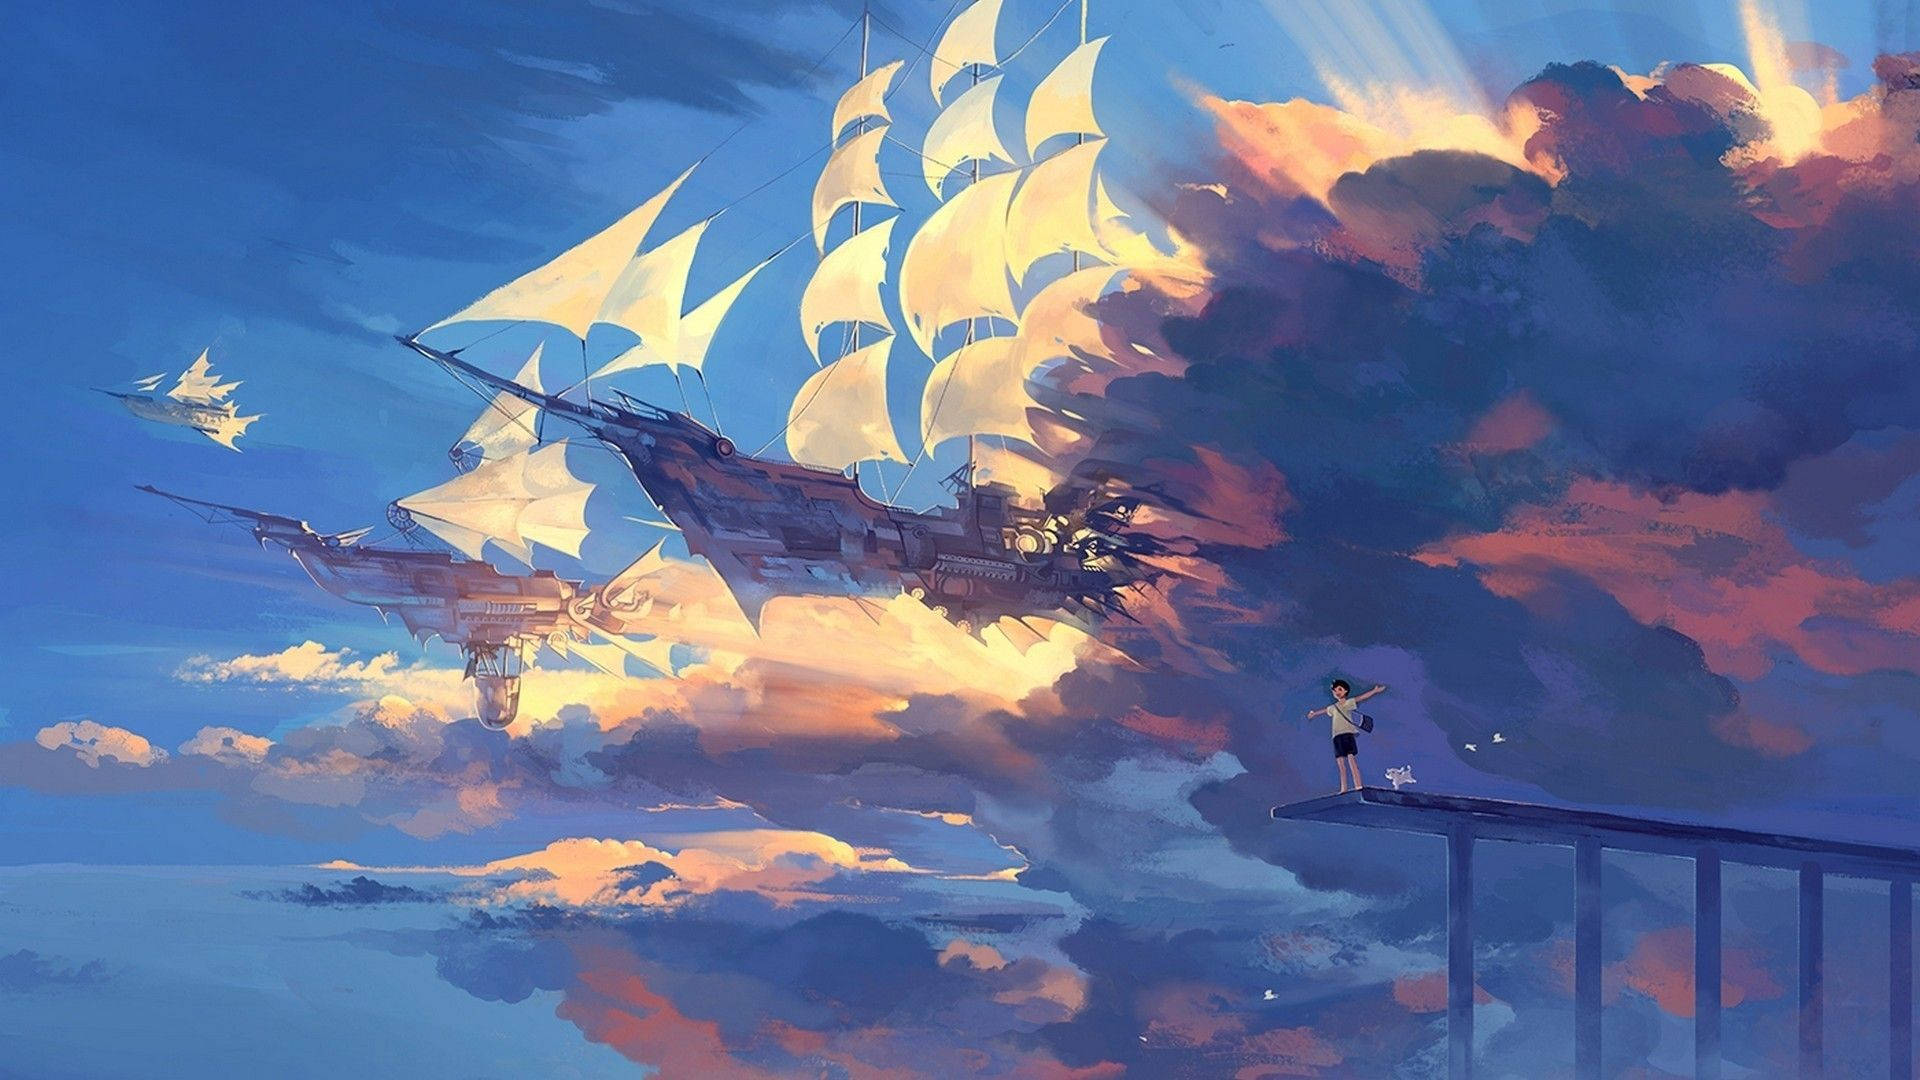 A Painting Of A Ship In The Sky Wallpaper